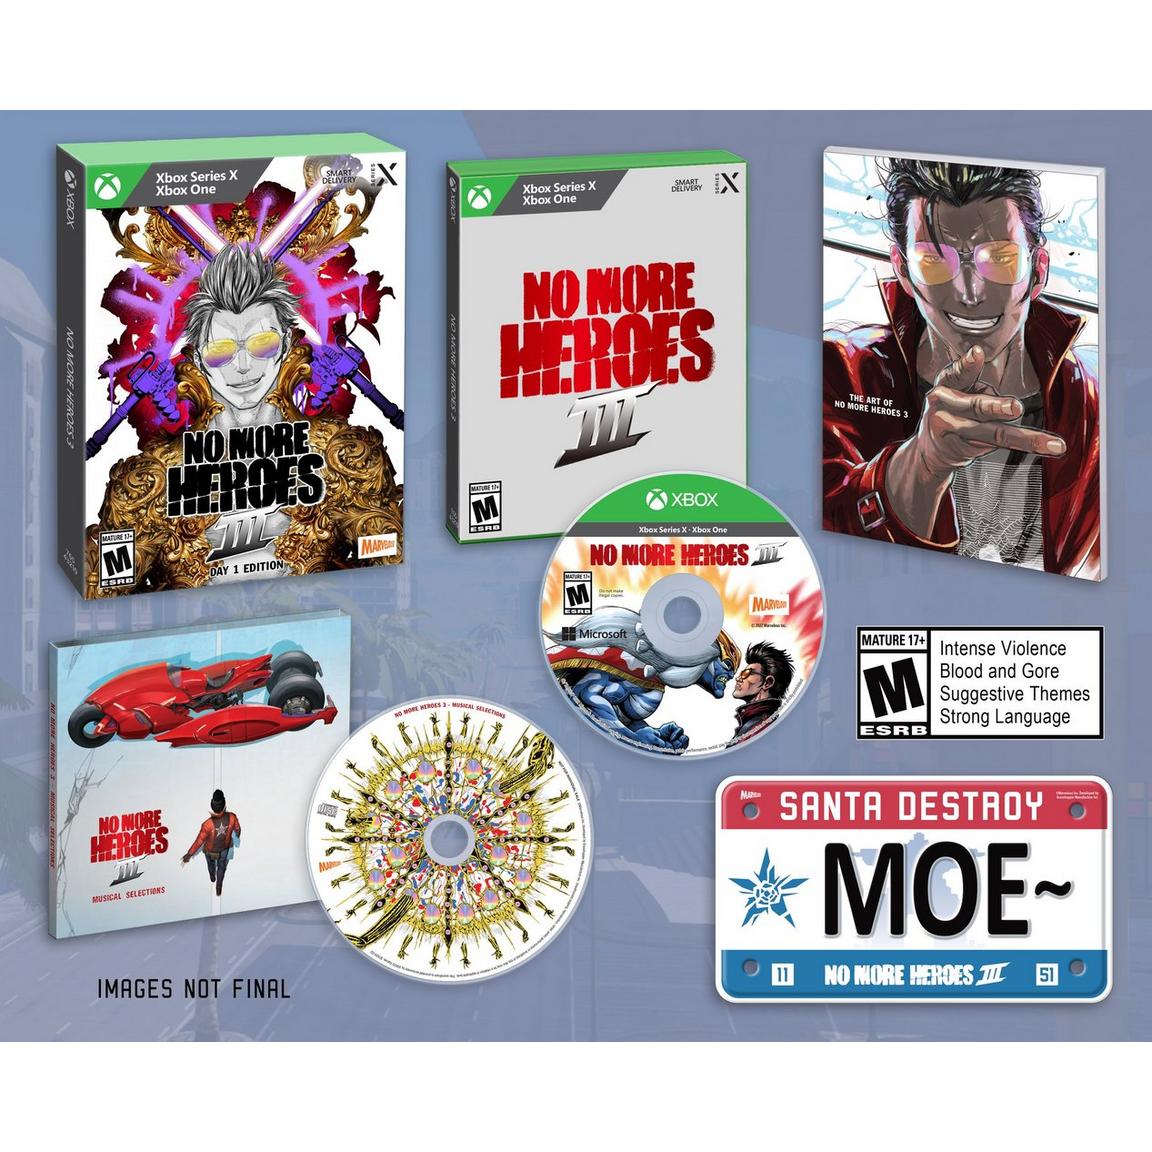 No More Heroes 3 - (NEW) (Xbox Series X)